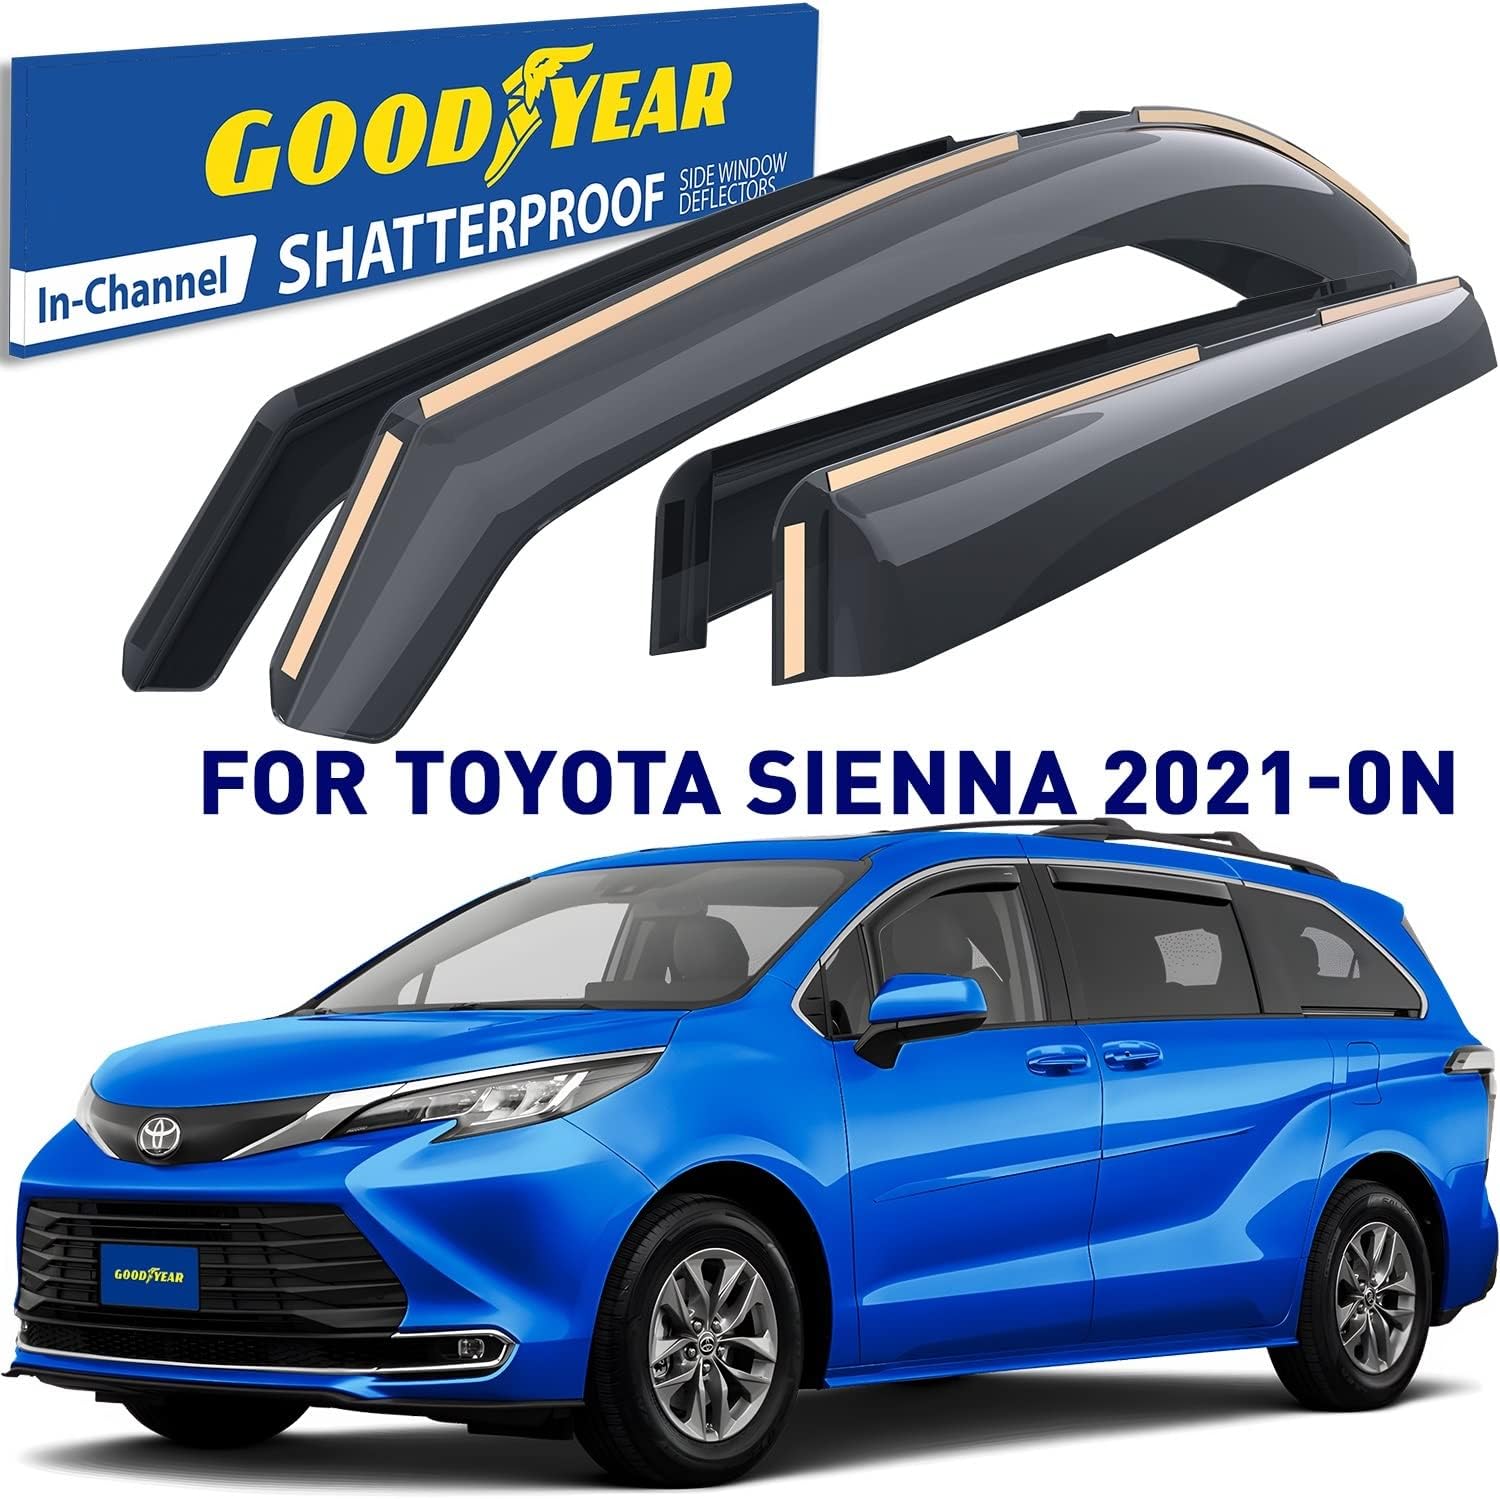 Goodyear Shatterproof in-Channel Window Deflectors for Toyota Sienna 2021-2024, Rain Guards, Window Visors for Cars, Vent Deflector, Car Accessories, 4 pcs - GY007837